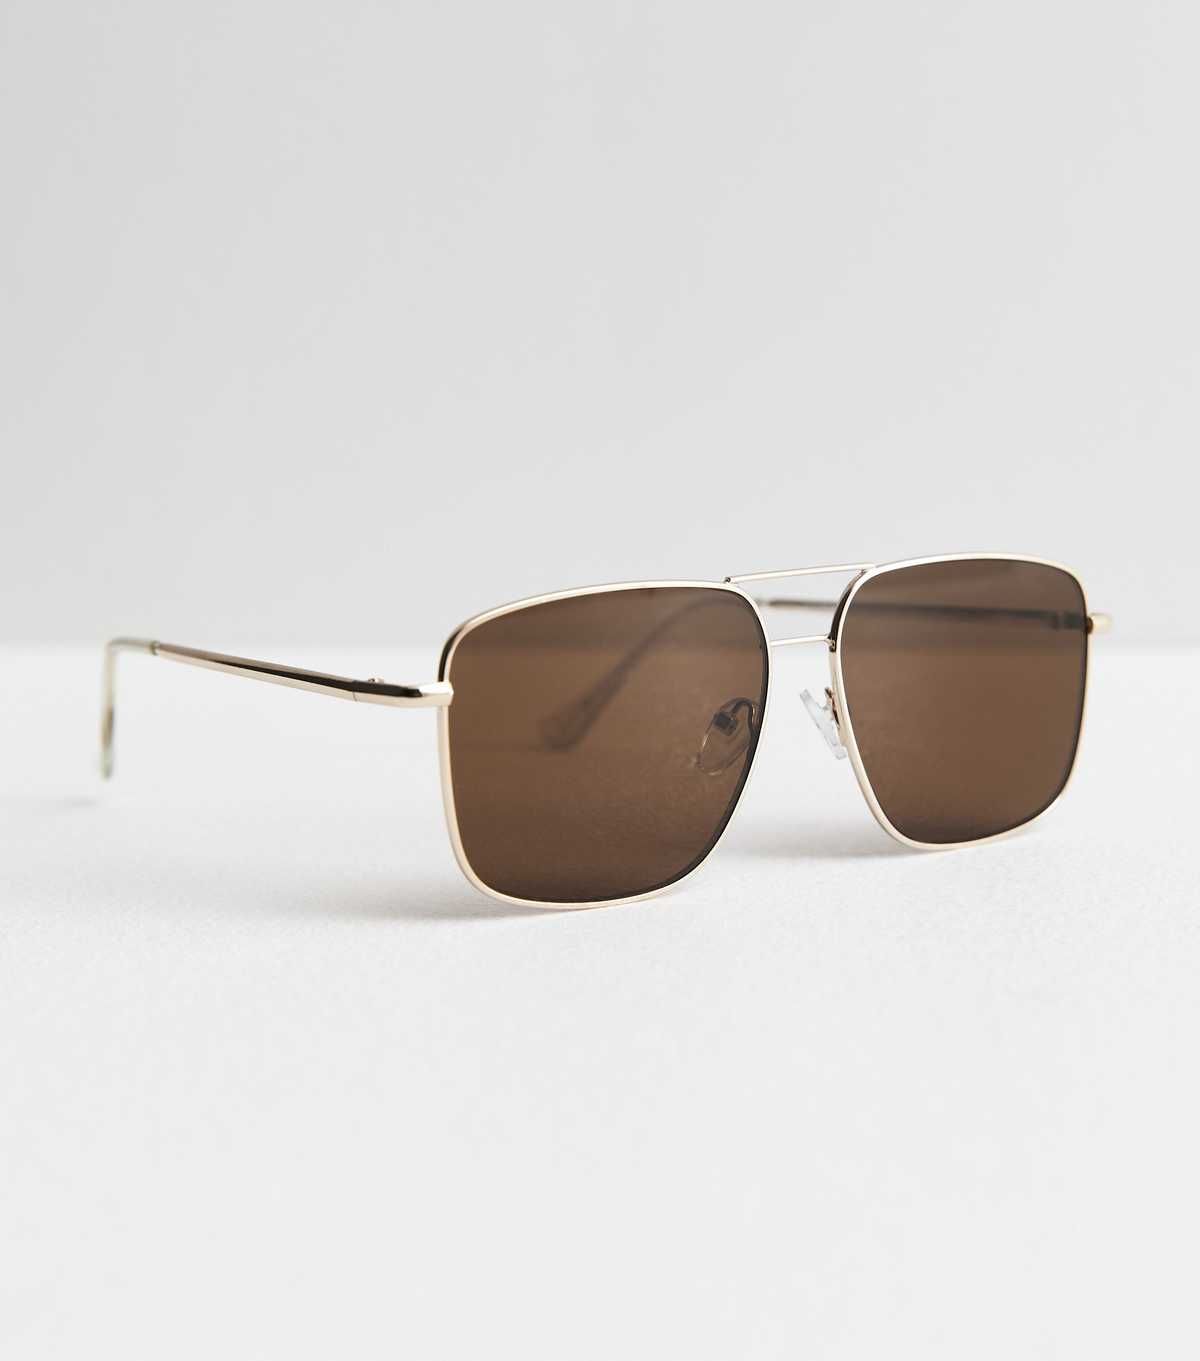 Gold Square Pilot Sunglasses
						
						Add to Saved Items
						Remove from Saved Items | New Look (UK)